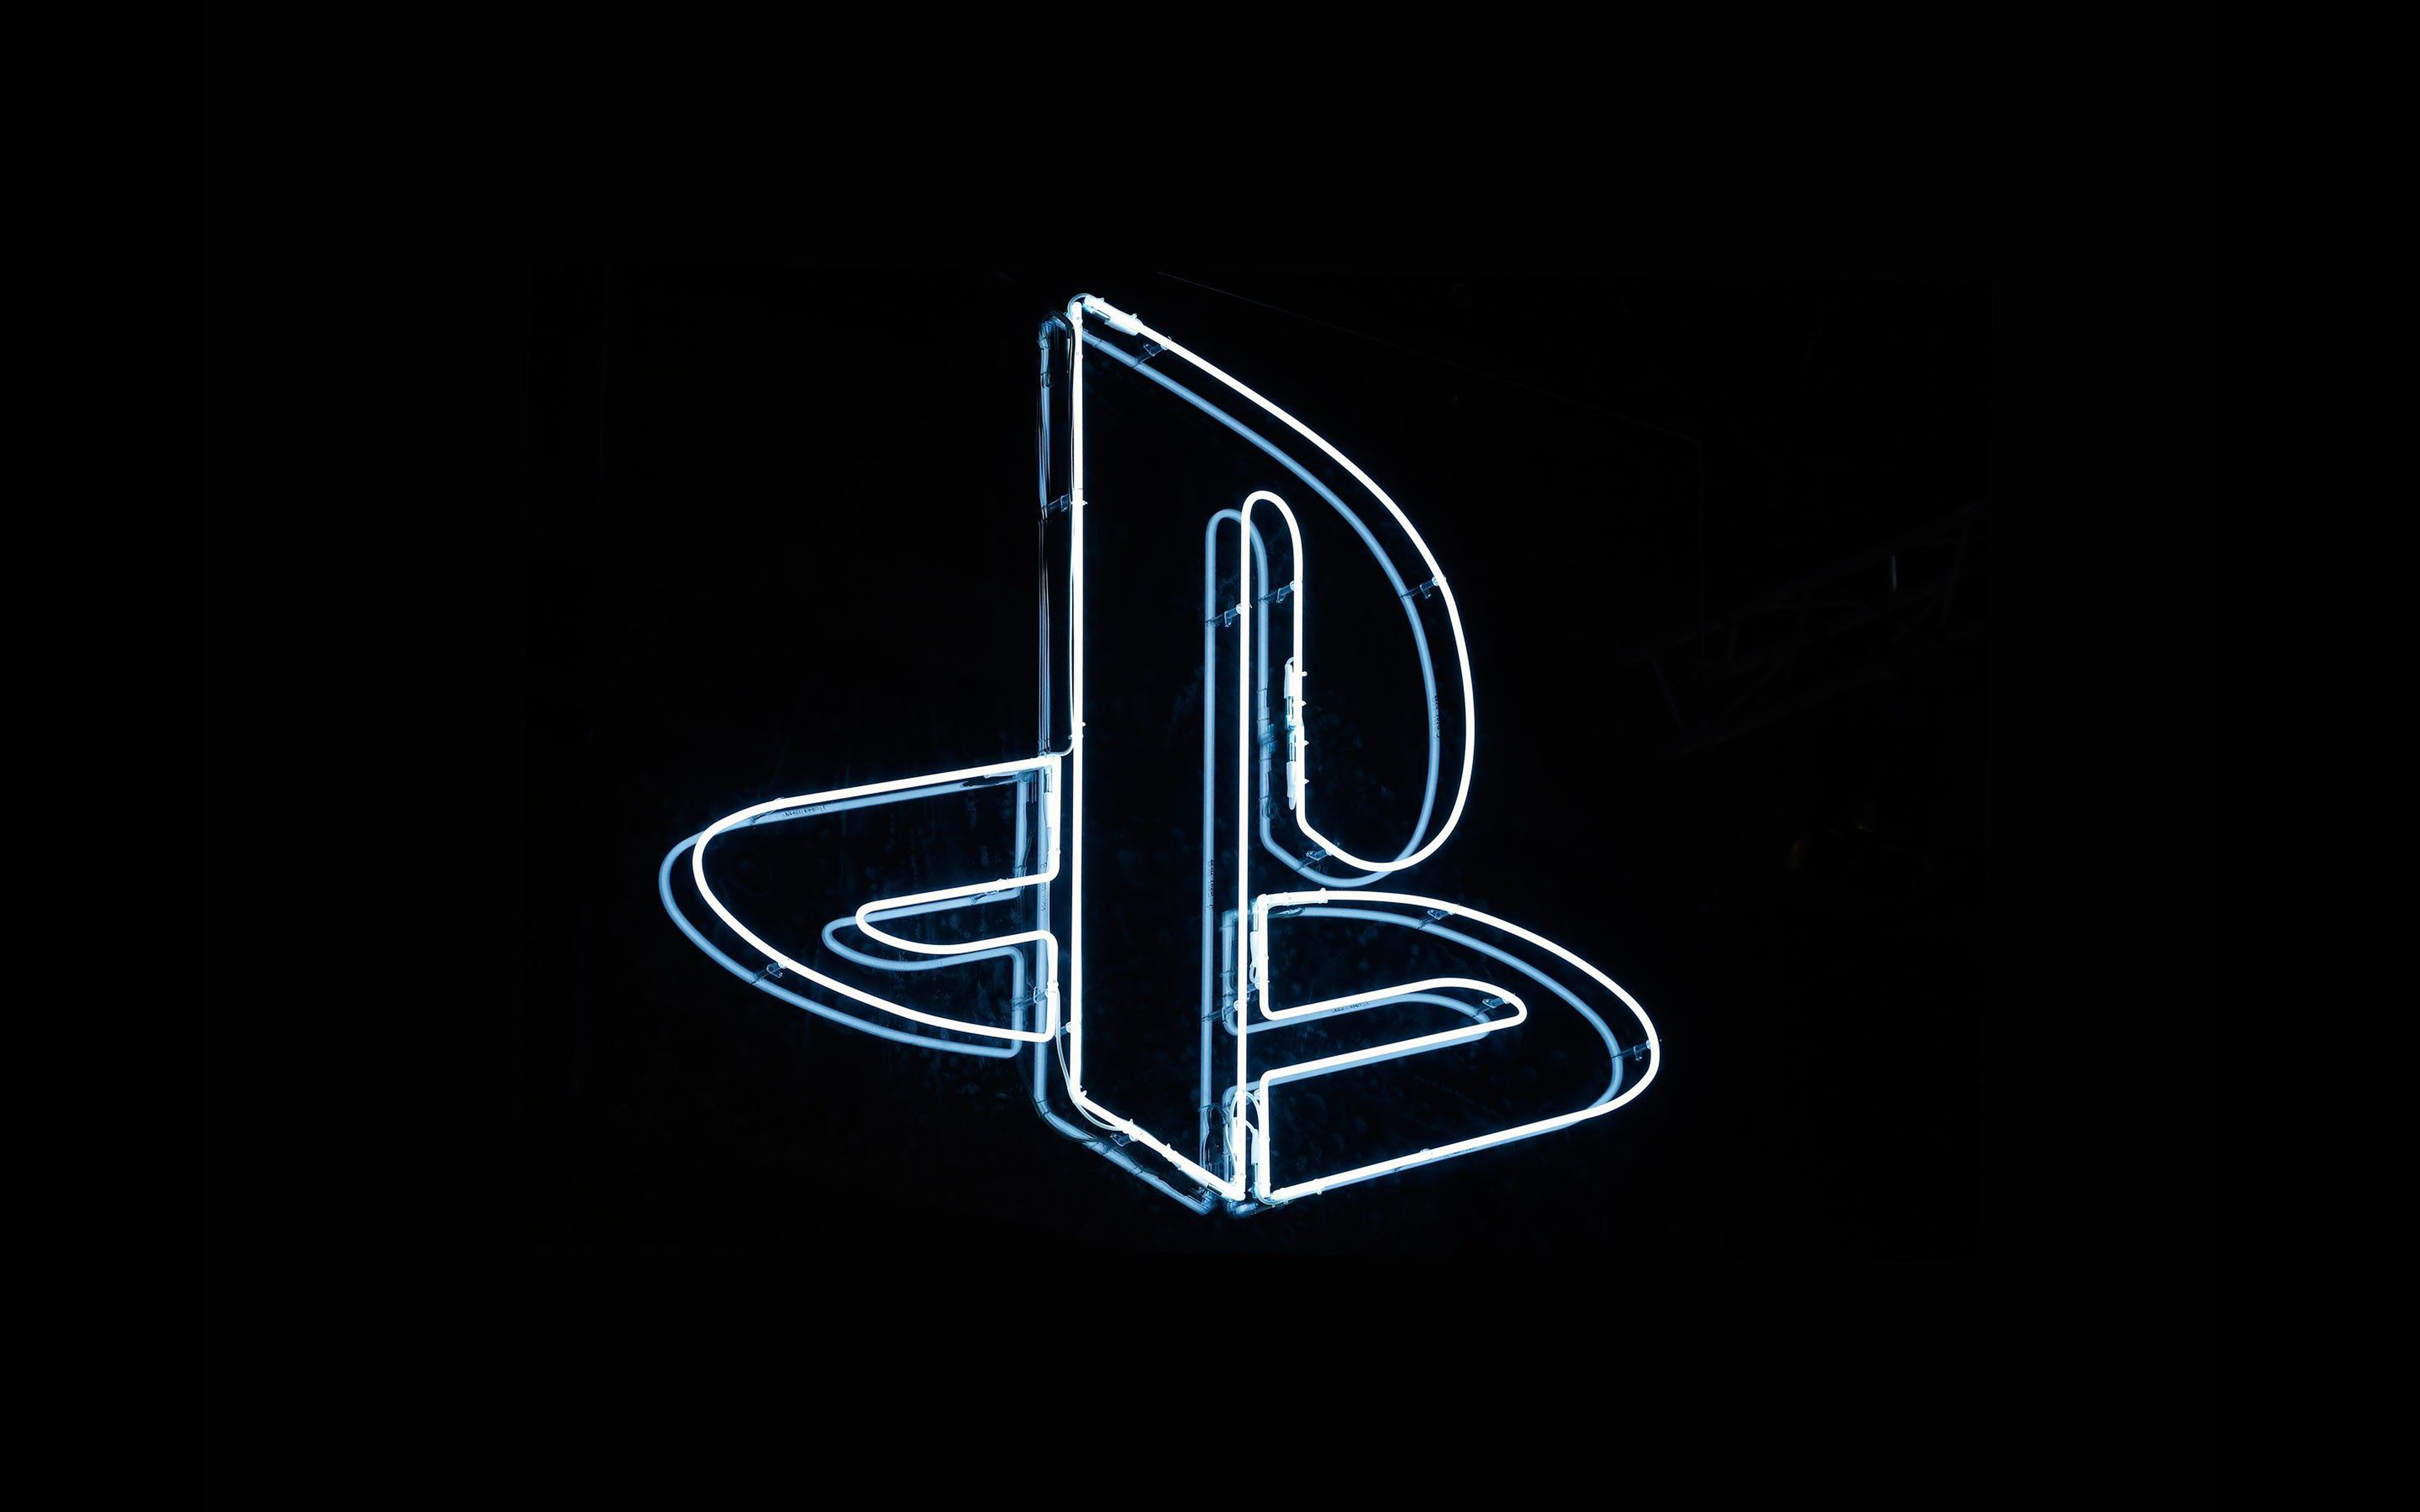 Download wallpaper PlayStation linear logo, 4k, minimal, black background, creative, artwork, PlayStation neon logo, PlayStation minimalism, brands, PlayStation logo, PlayStation for desktop with resolution 3840x2400. High Quality HD picture wallpaper